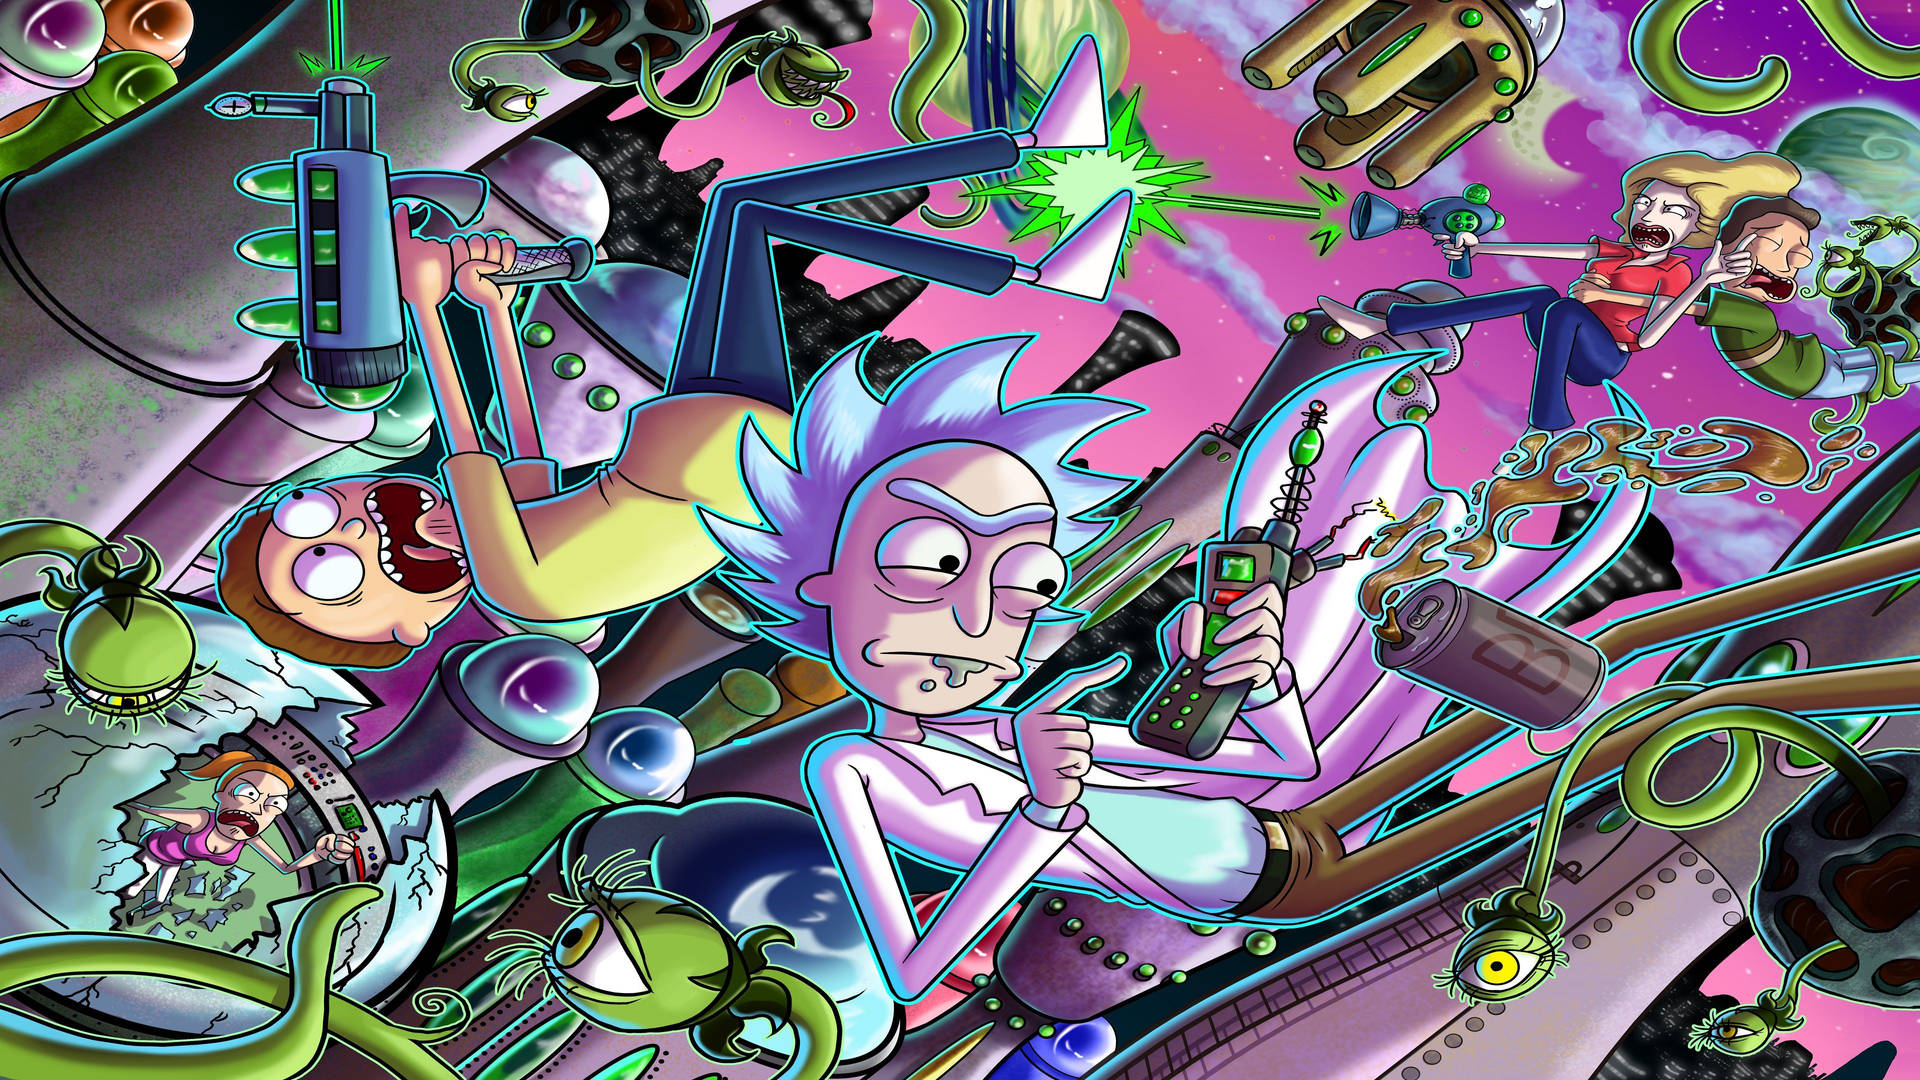 Get Ready for the Adventure with Rick and Morty Wallpaper